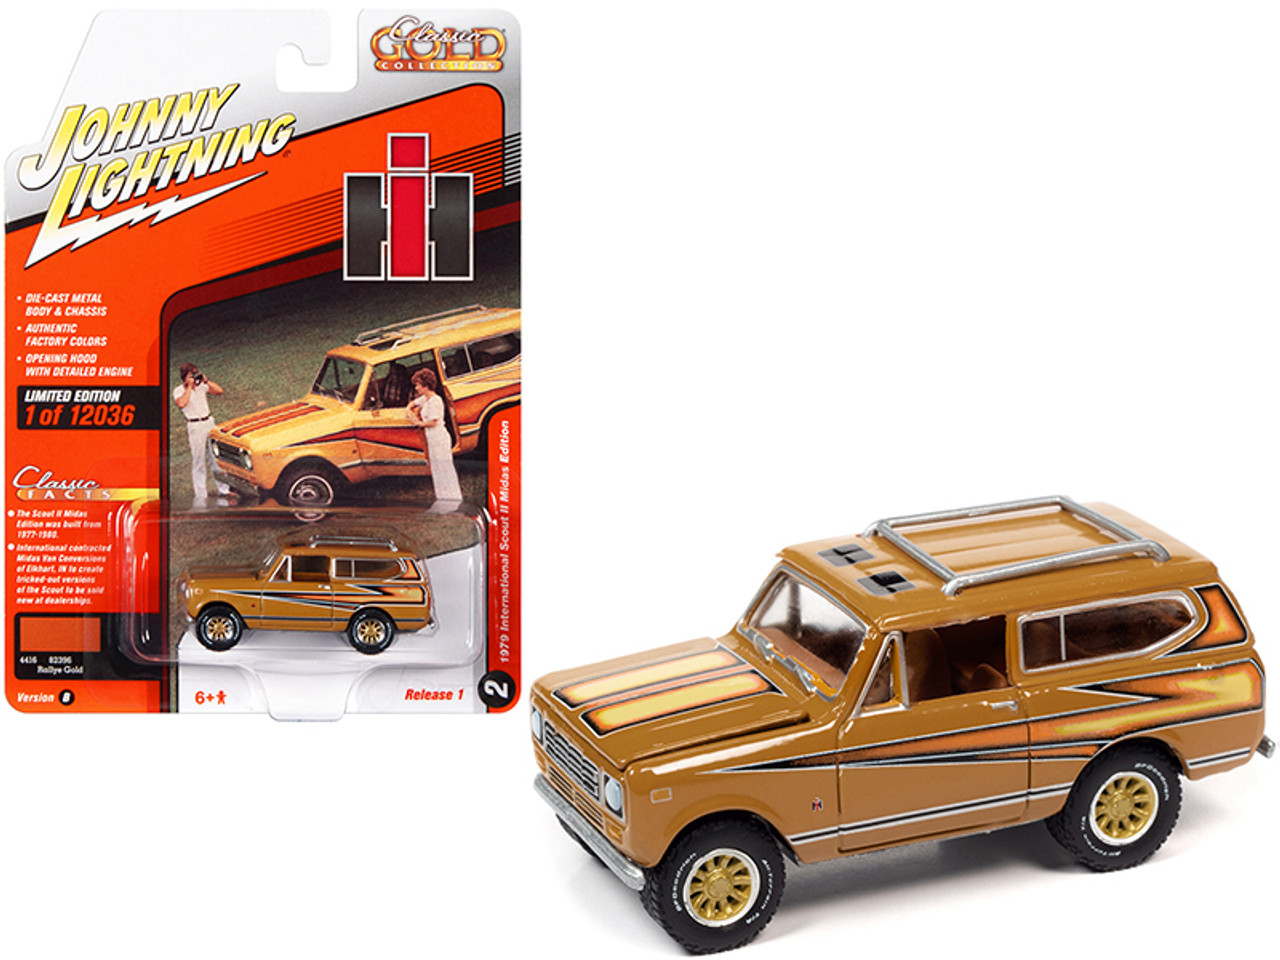 1979 International Scout II Midas Edition Rallye Gold with Graphics "Classic Gold Collection" Series Limited Edition to 12036 pieces Worldwide 1/64 Diecast Model Car by Johnny Lightning